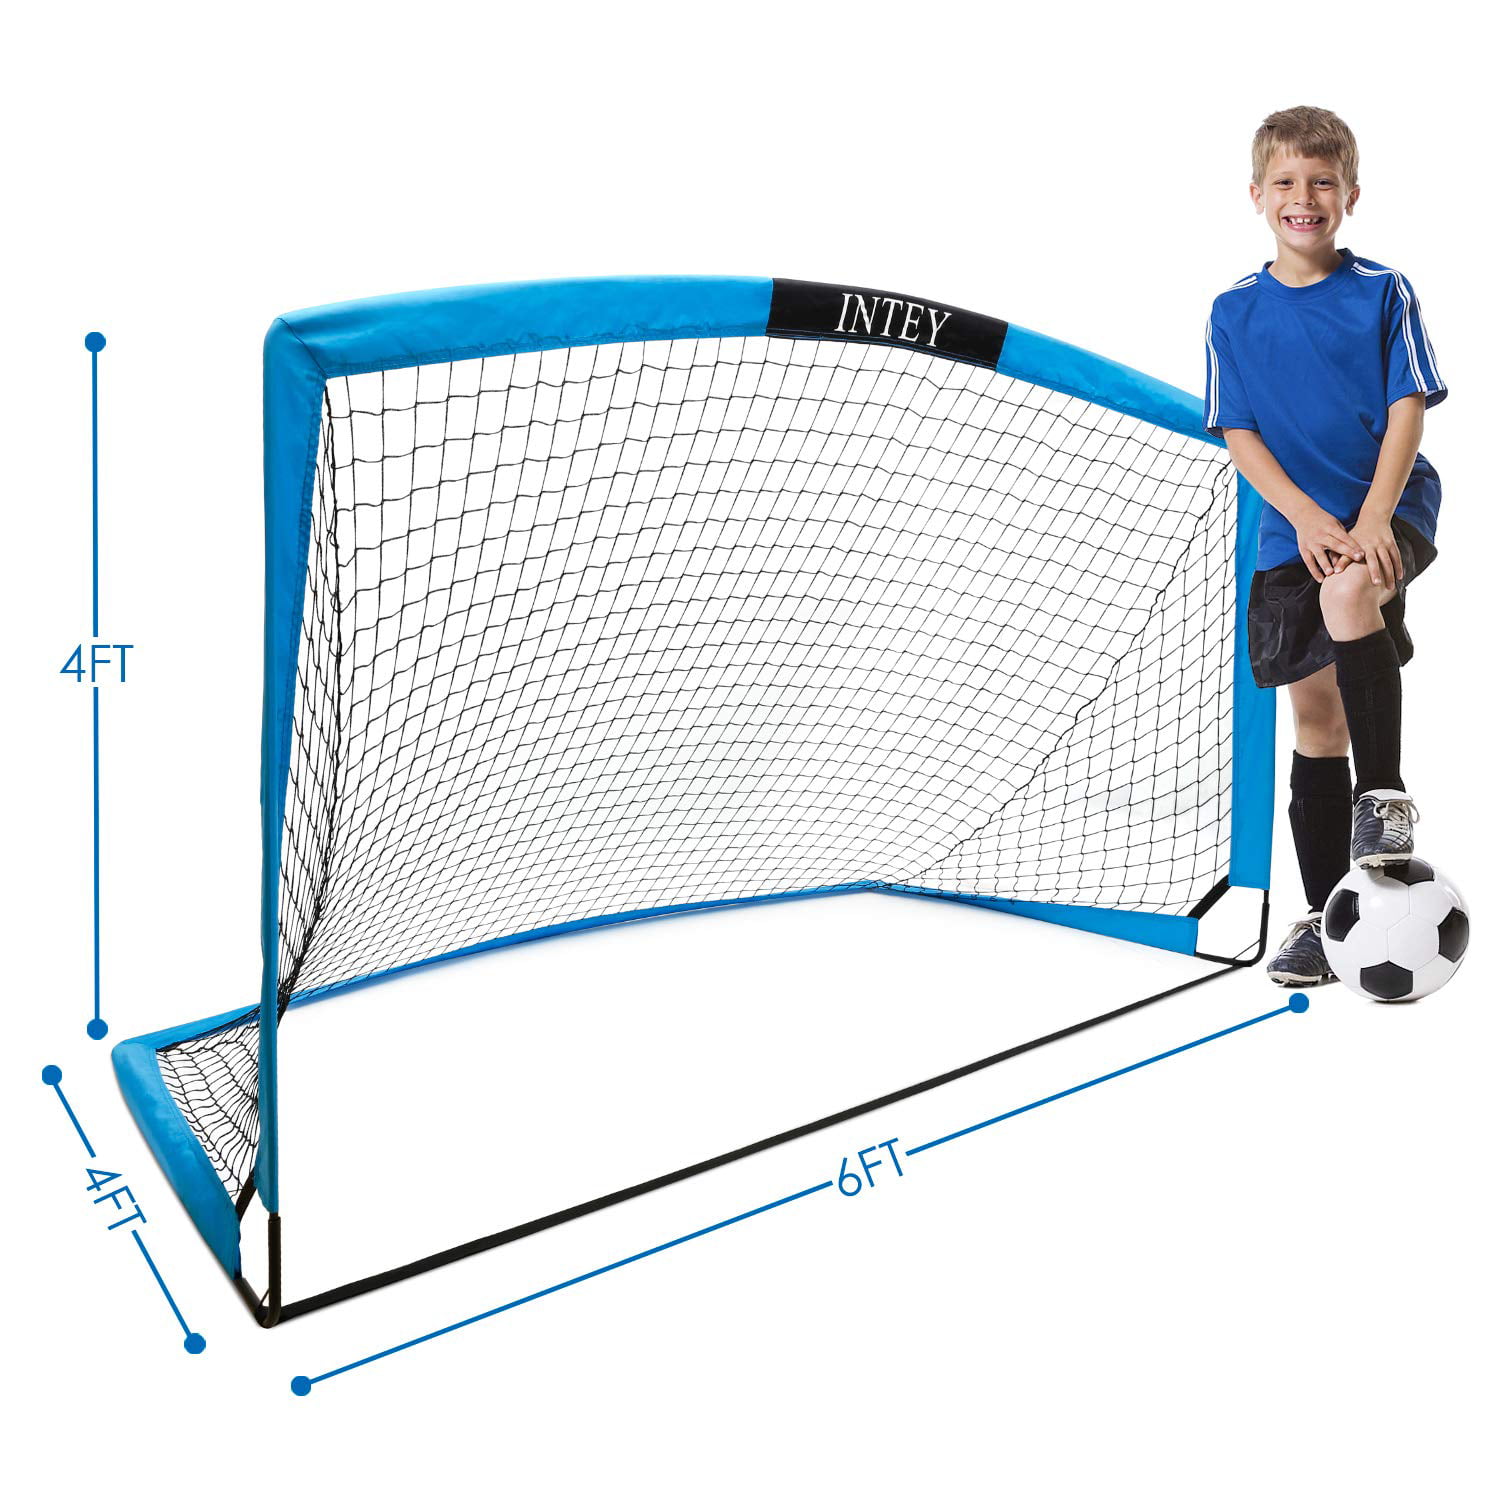 with Carry Bag for Backyard Games Set of 2 INTEY Portable Soccer Goals 4x3FT 